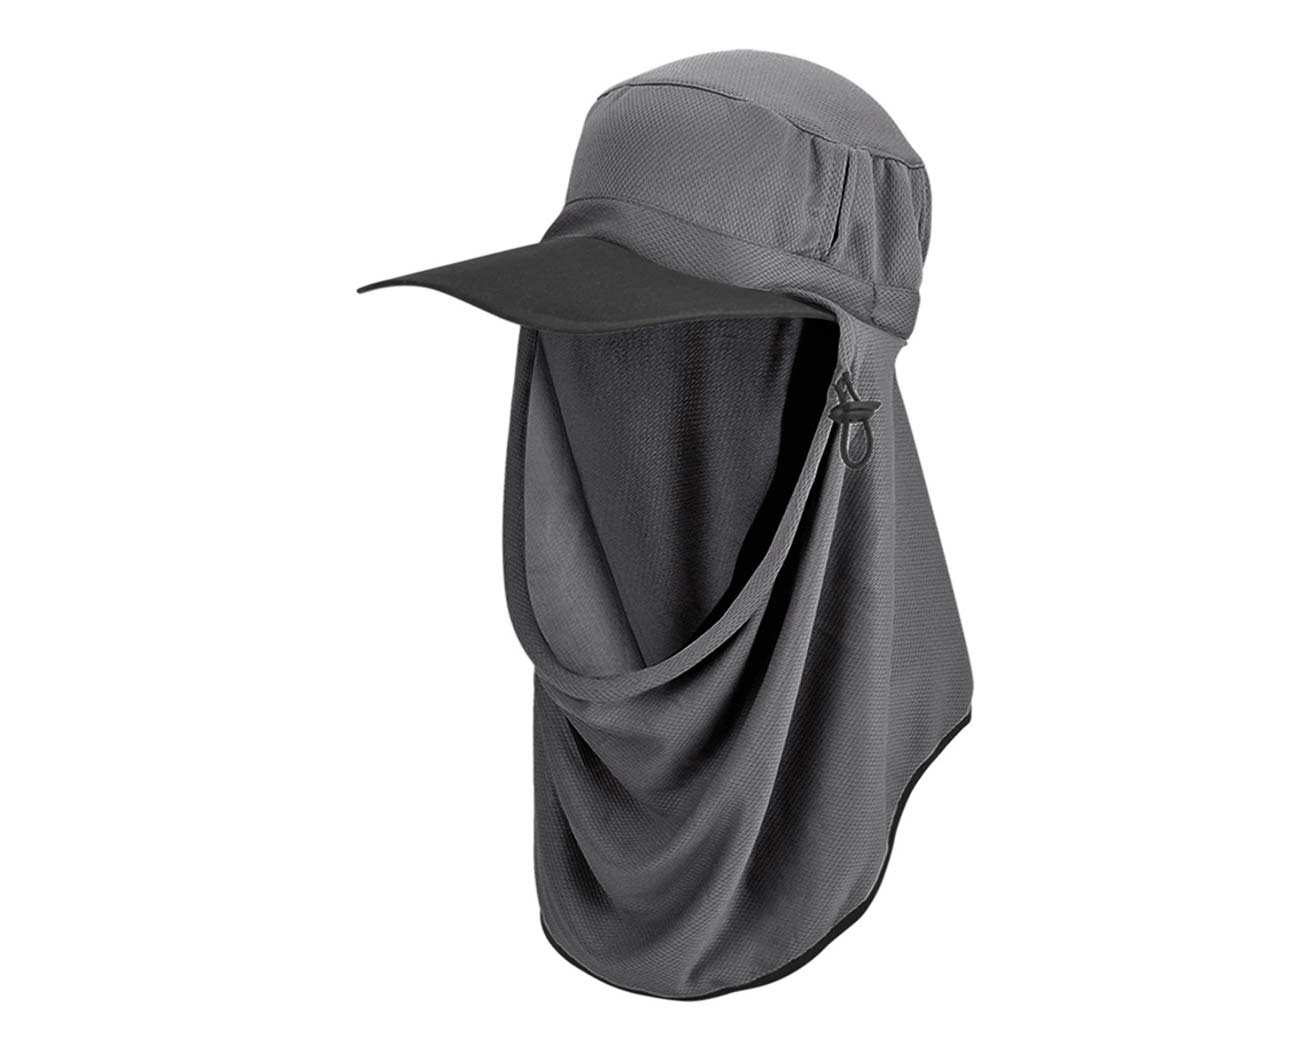 Adapt-a-Cap in Ultra Steel previously known as Charcoal - Ultimate Sun Protection